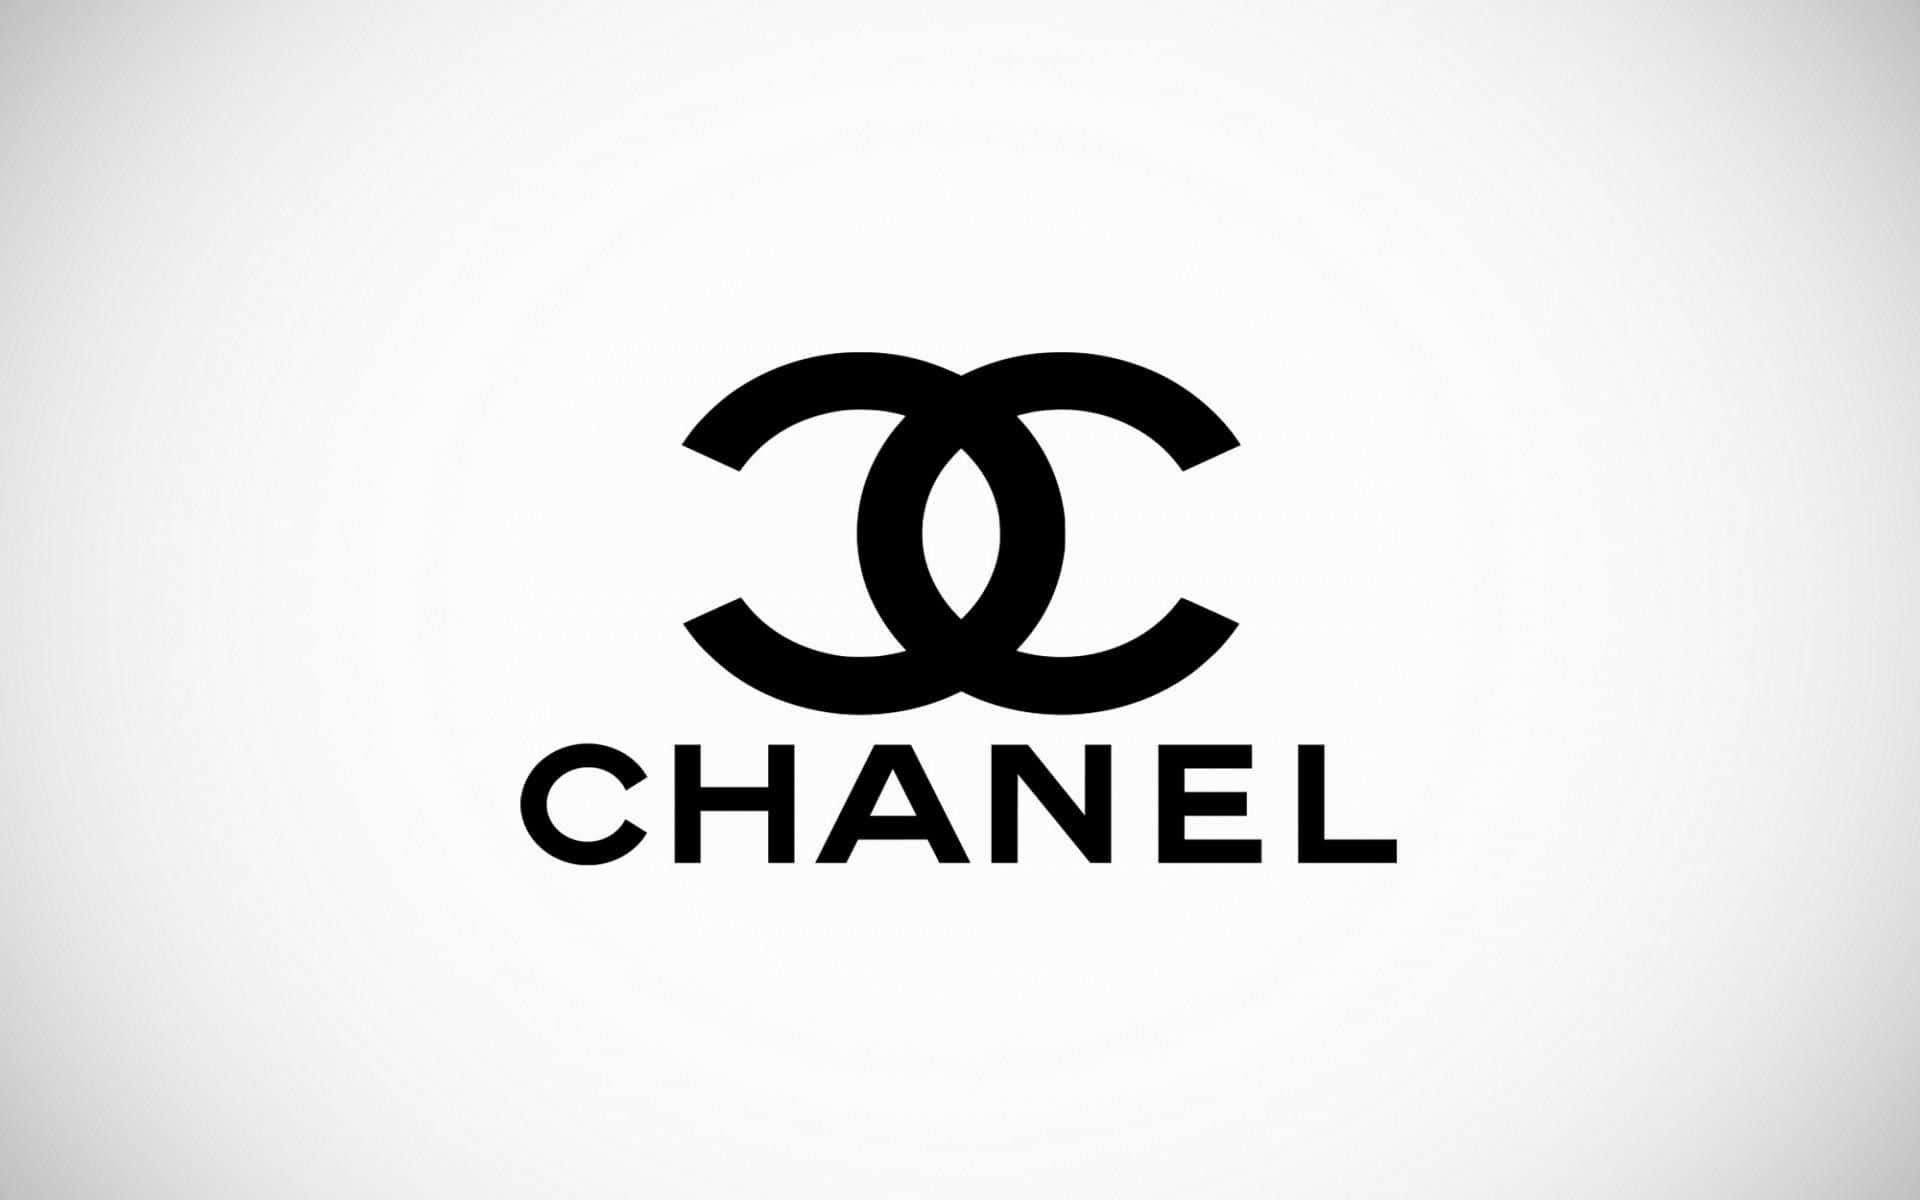 The iconic and luxurious Chanel logo.